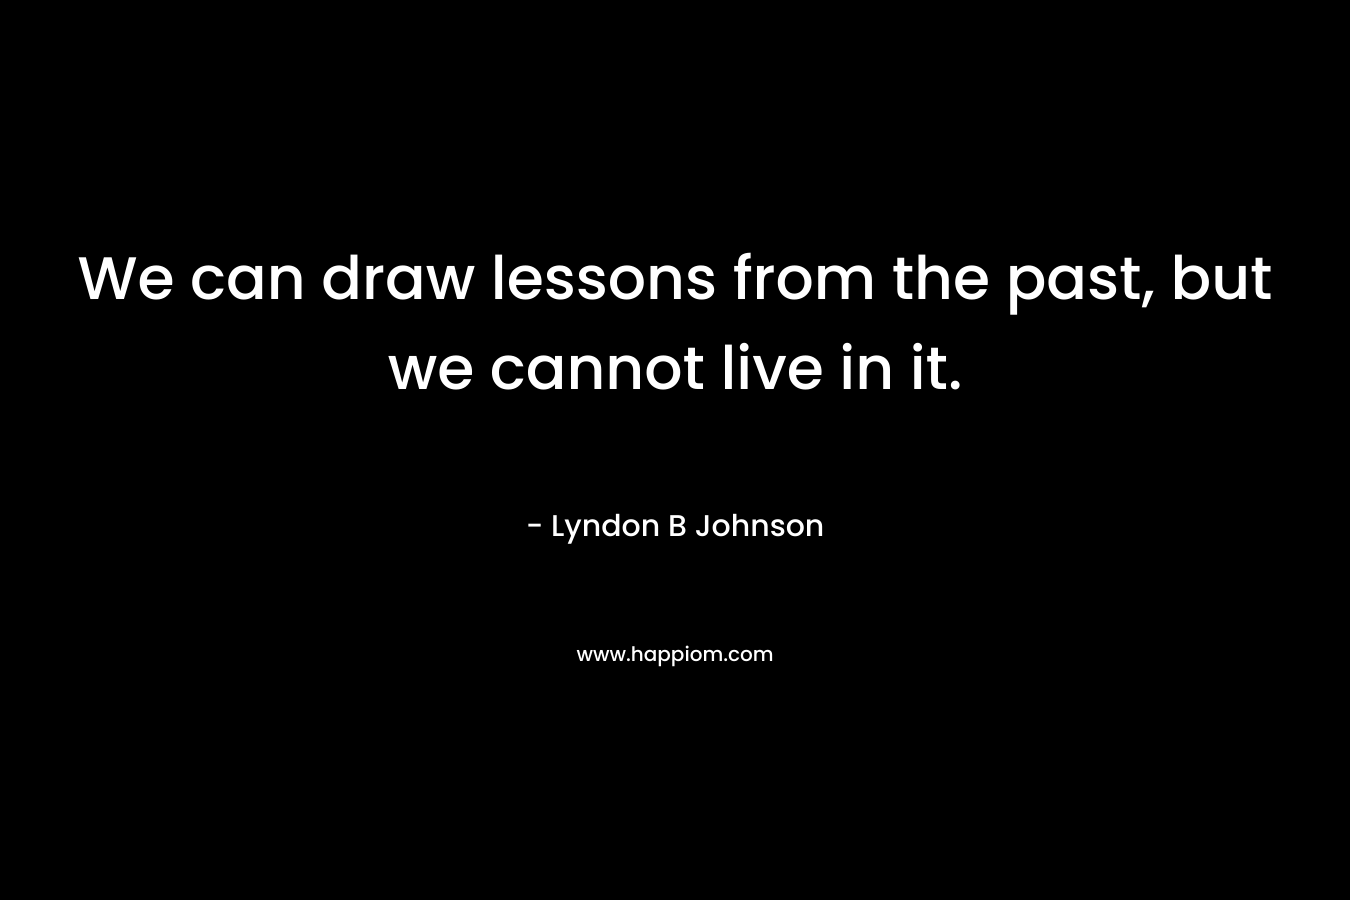 We can draw lessons from the past, but we cannot live in it.